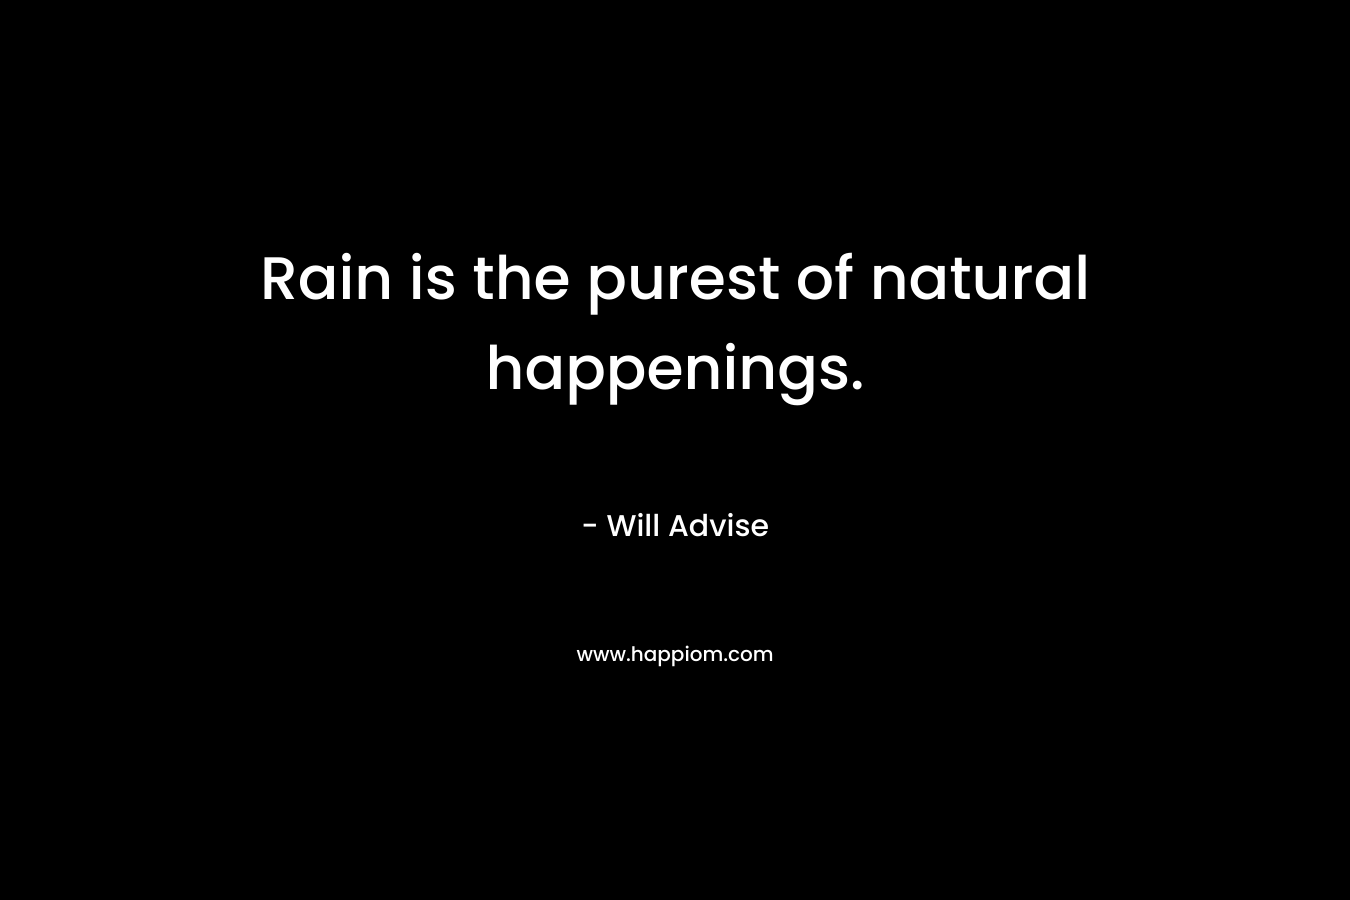 Rain is the purest of natural happenings.